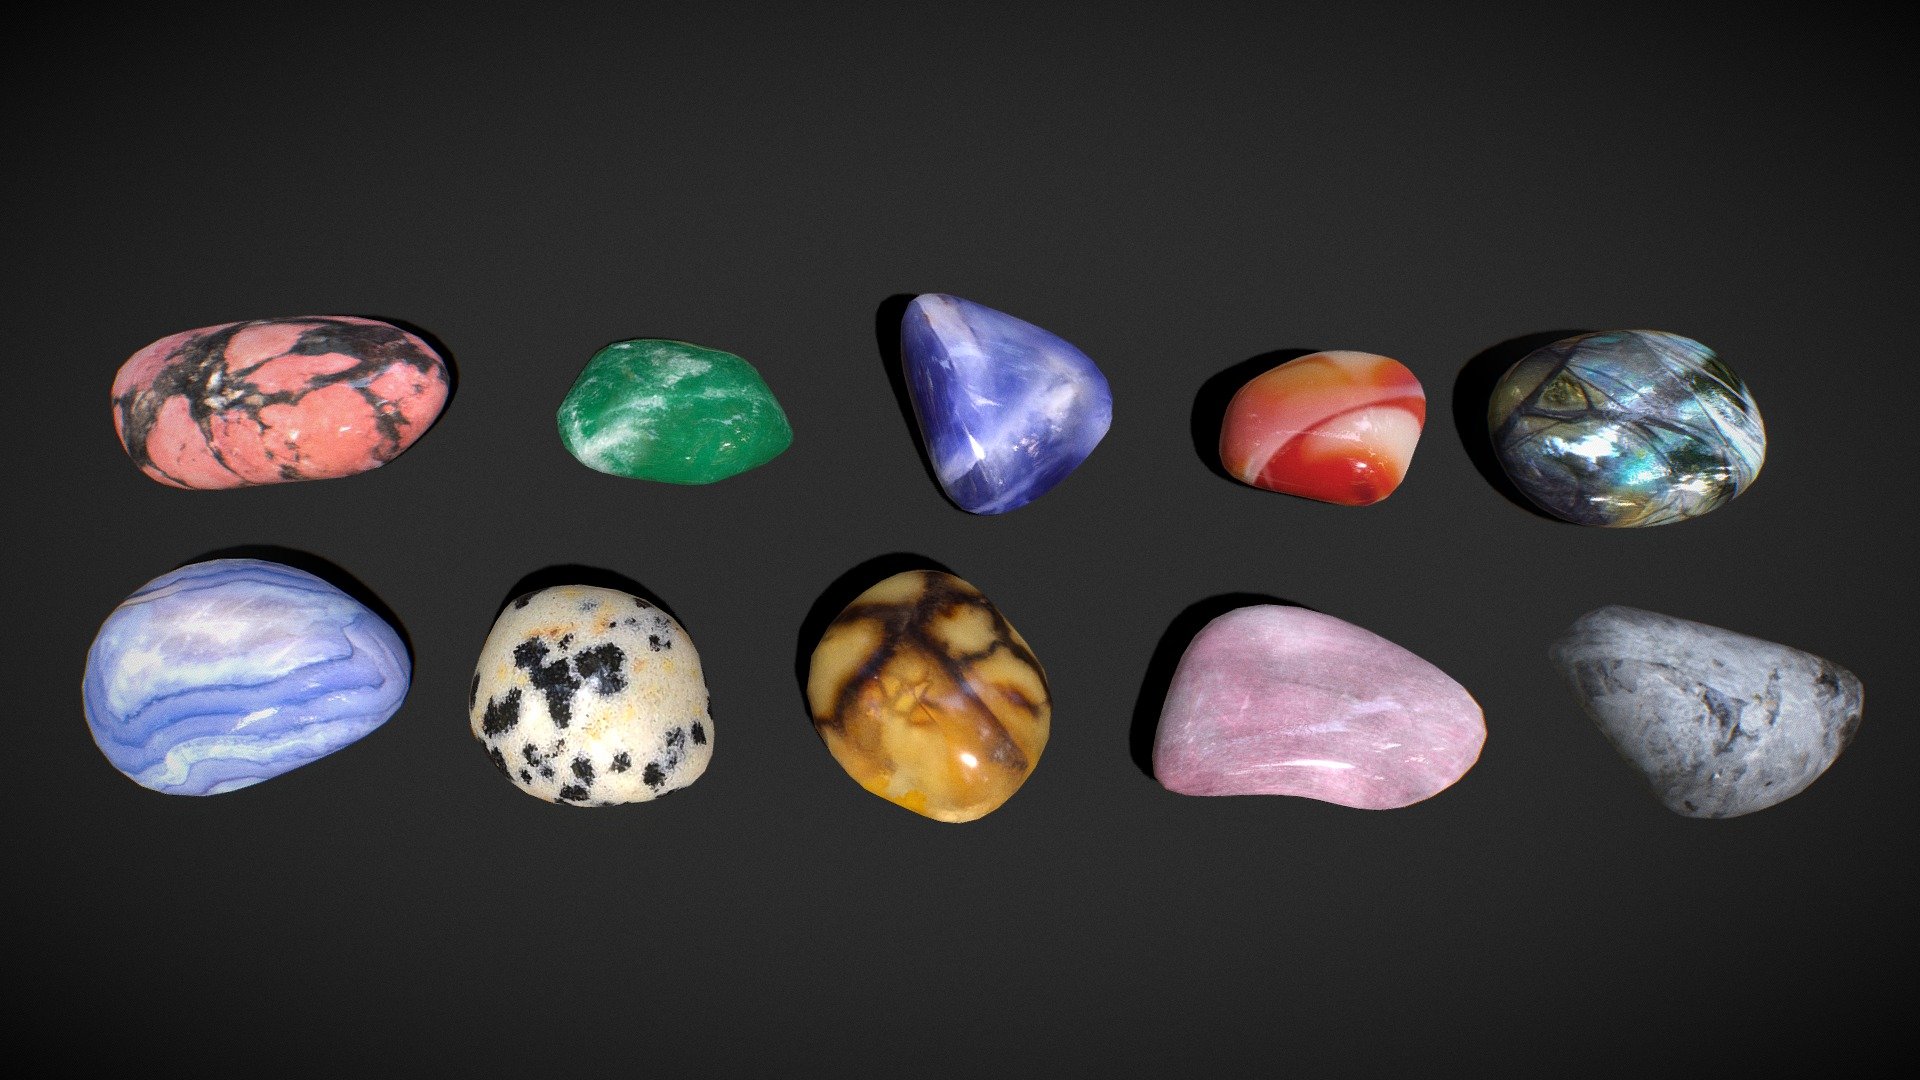 Polished Gemstones / Tumbled Minerals - low poly​ pack

Triangles: 7.1k Vertices: 3.6k

4096x4096 PNG texture




Rhodonite Stone

Green Aventurine

Sodalite Stone

Carnelian Stone

Labradorite Stone

Blue Lace Agate

Dalmatian Stone

Septarian Stone

Rose Quartz

Clear Quartz
 - Polished Gemstones / Tumbled Minerals - low poly - Buy Royalty Free 3D model by Karolina Renkiewicz (@KarolinaRenkiewicz) 3d model